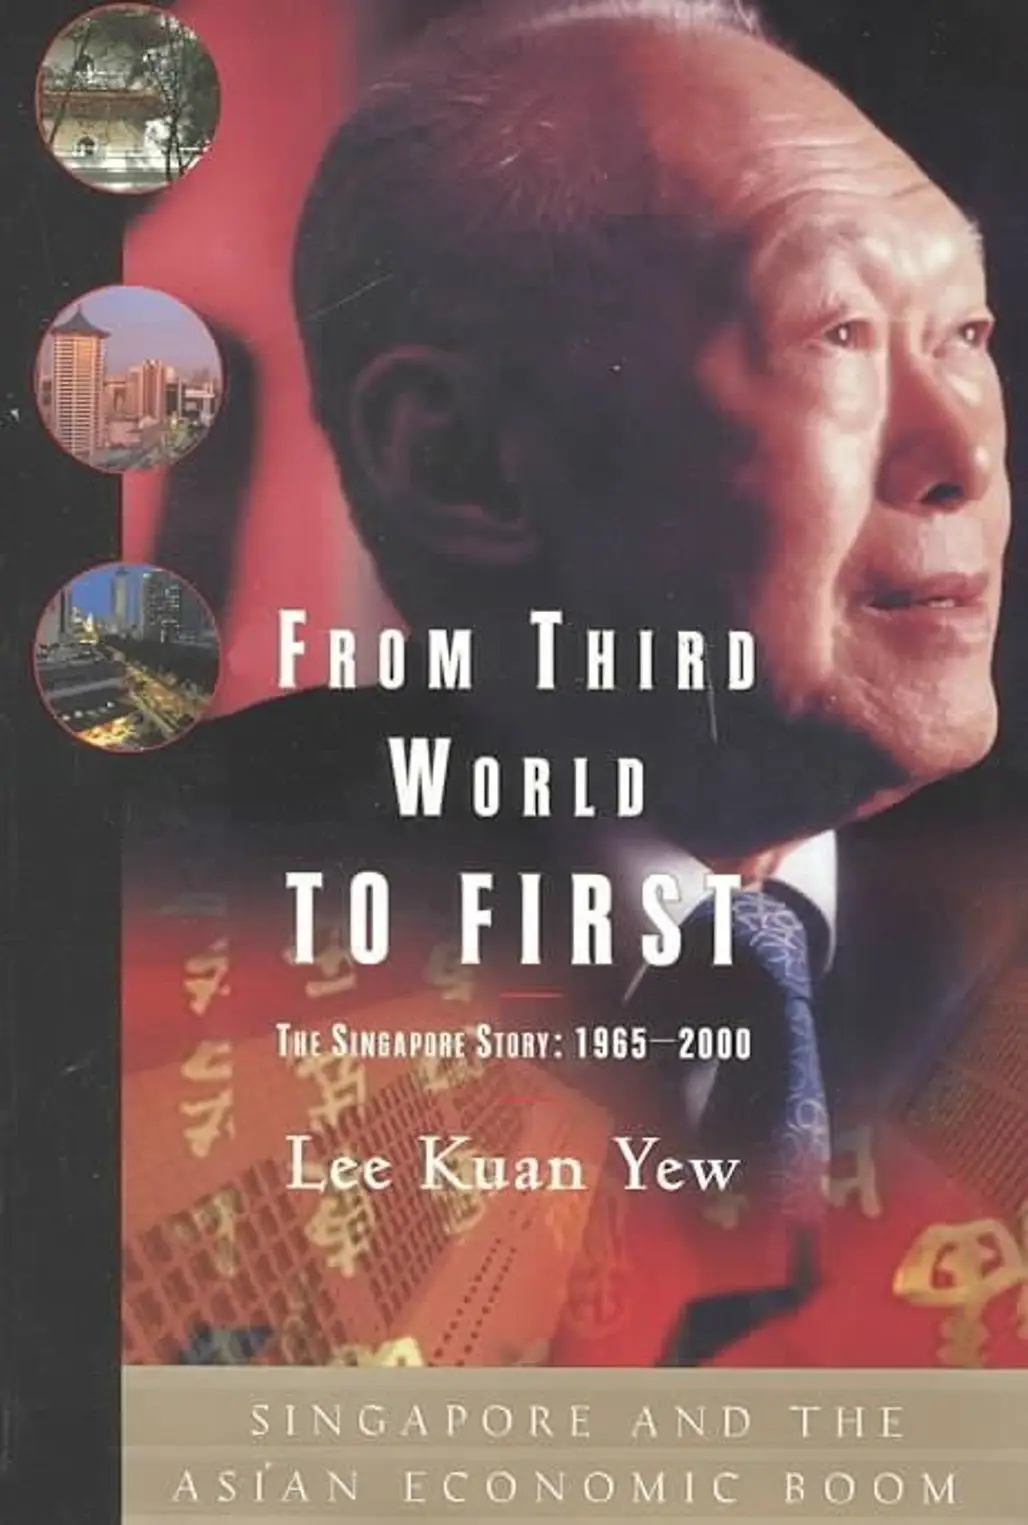 From Third World to First: the Singapore Story 1965-2000